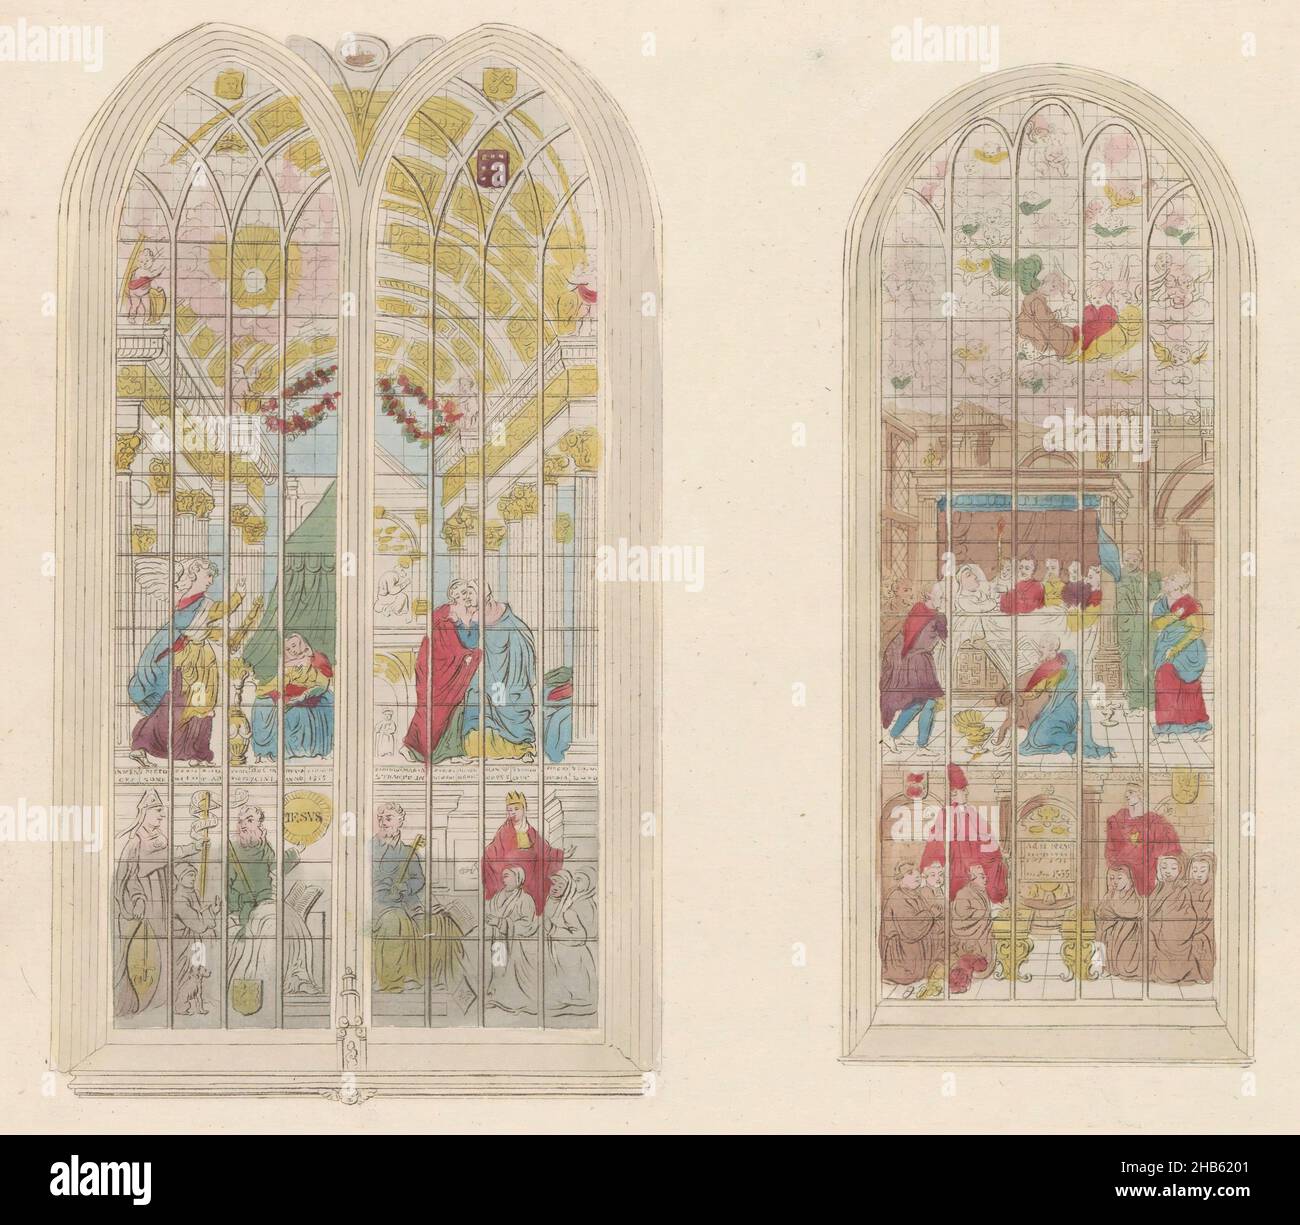 Stained glass windows in the Oude Kerk in Amsterdam, 1810-1825, Représentation des fameuses Vitres peintes de l'Eglise vieille (title on object), Three stained glass windows in the Oude Kerk in Amsterdam, ca. 1810-1825. Part of a plate work from c. 1824-1825 with 74 (unnumbered) plates of the most important topographical views and various customs in the United Kingdom of the Netherlands., print maker: anonymous, publisher: Evert Maaskamp (mentioned on object), Amsterdam, 1810 - 1825, paper, etching, engraving, height 197 mm × width 228 mm Stock Photo